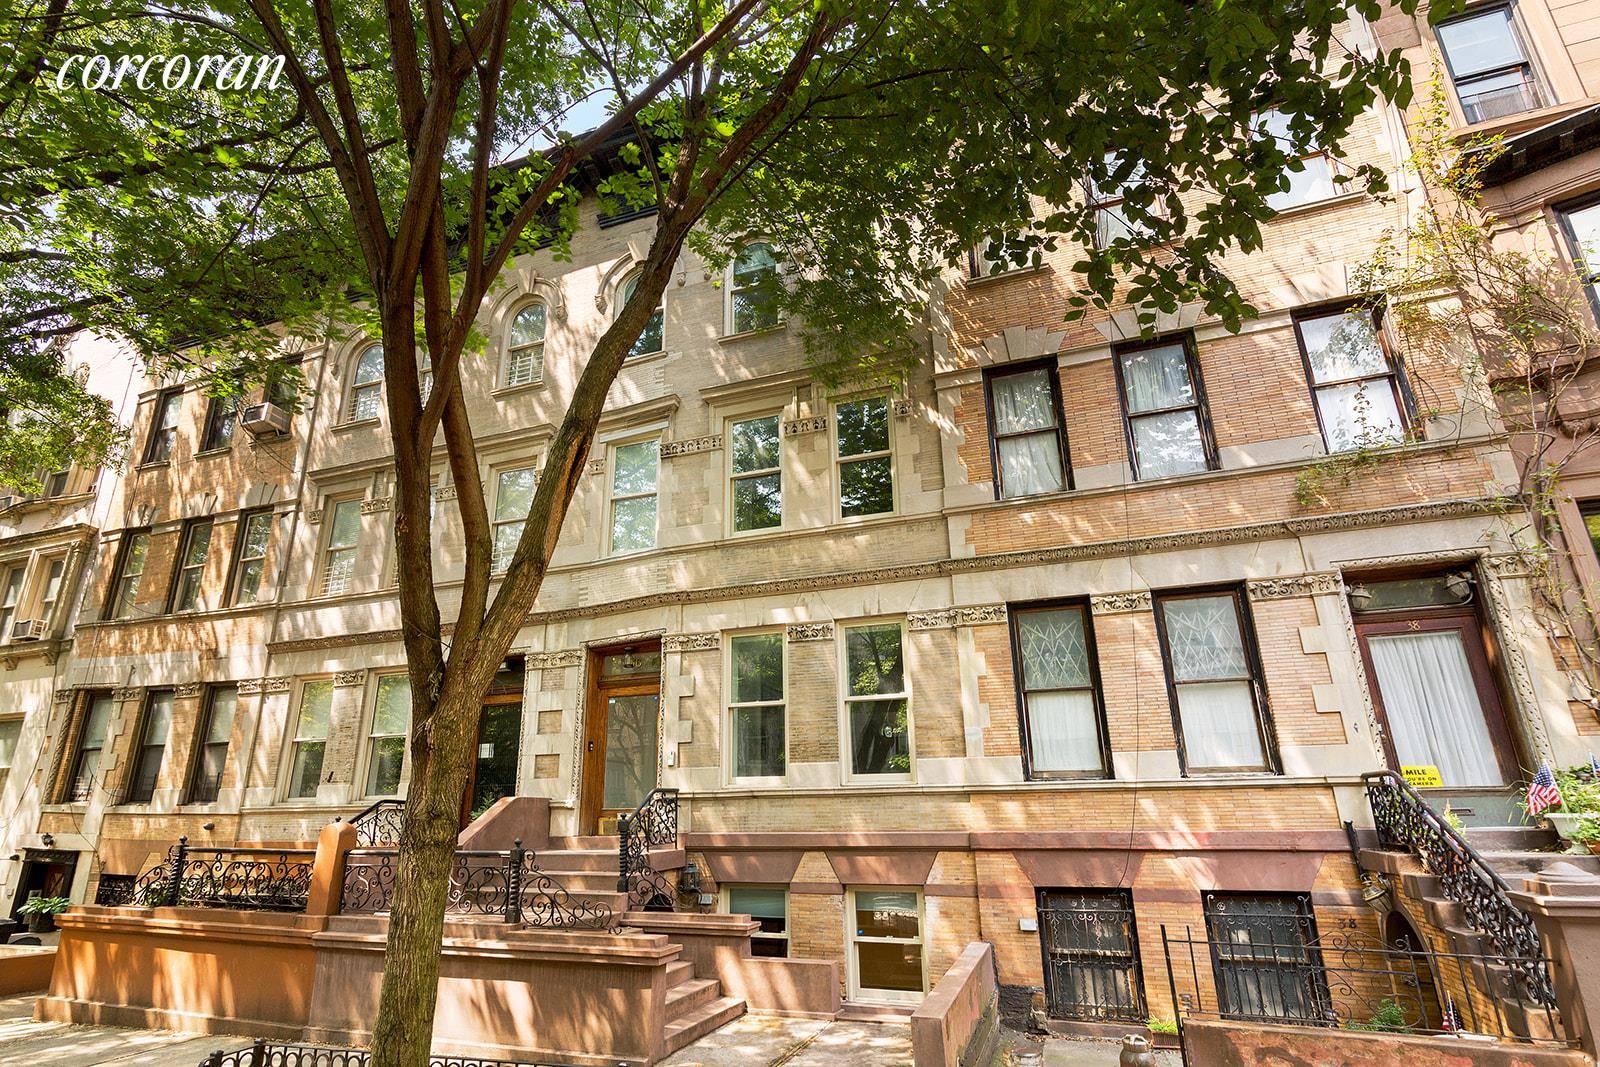 PRICE REDUCTION A spectacular 20 wide, four story townhouse on historic Hamilton Terrace.